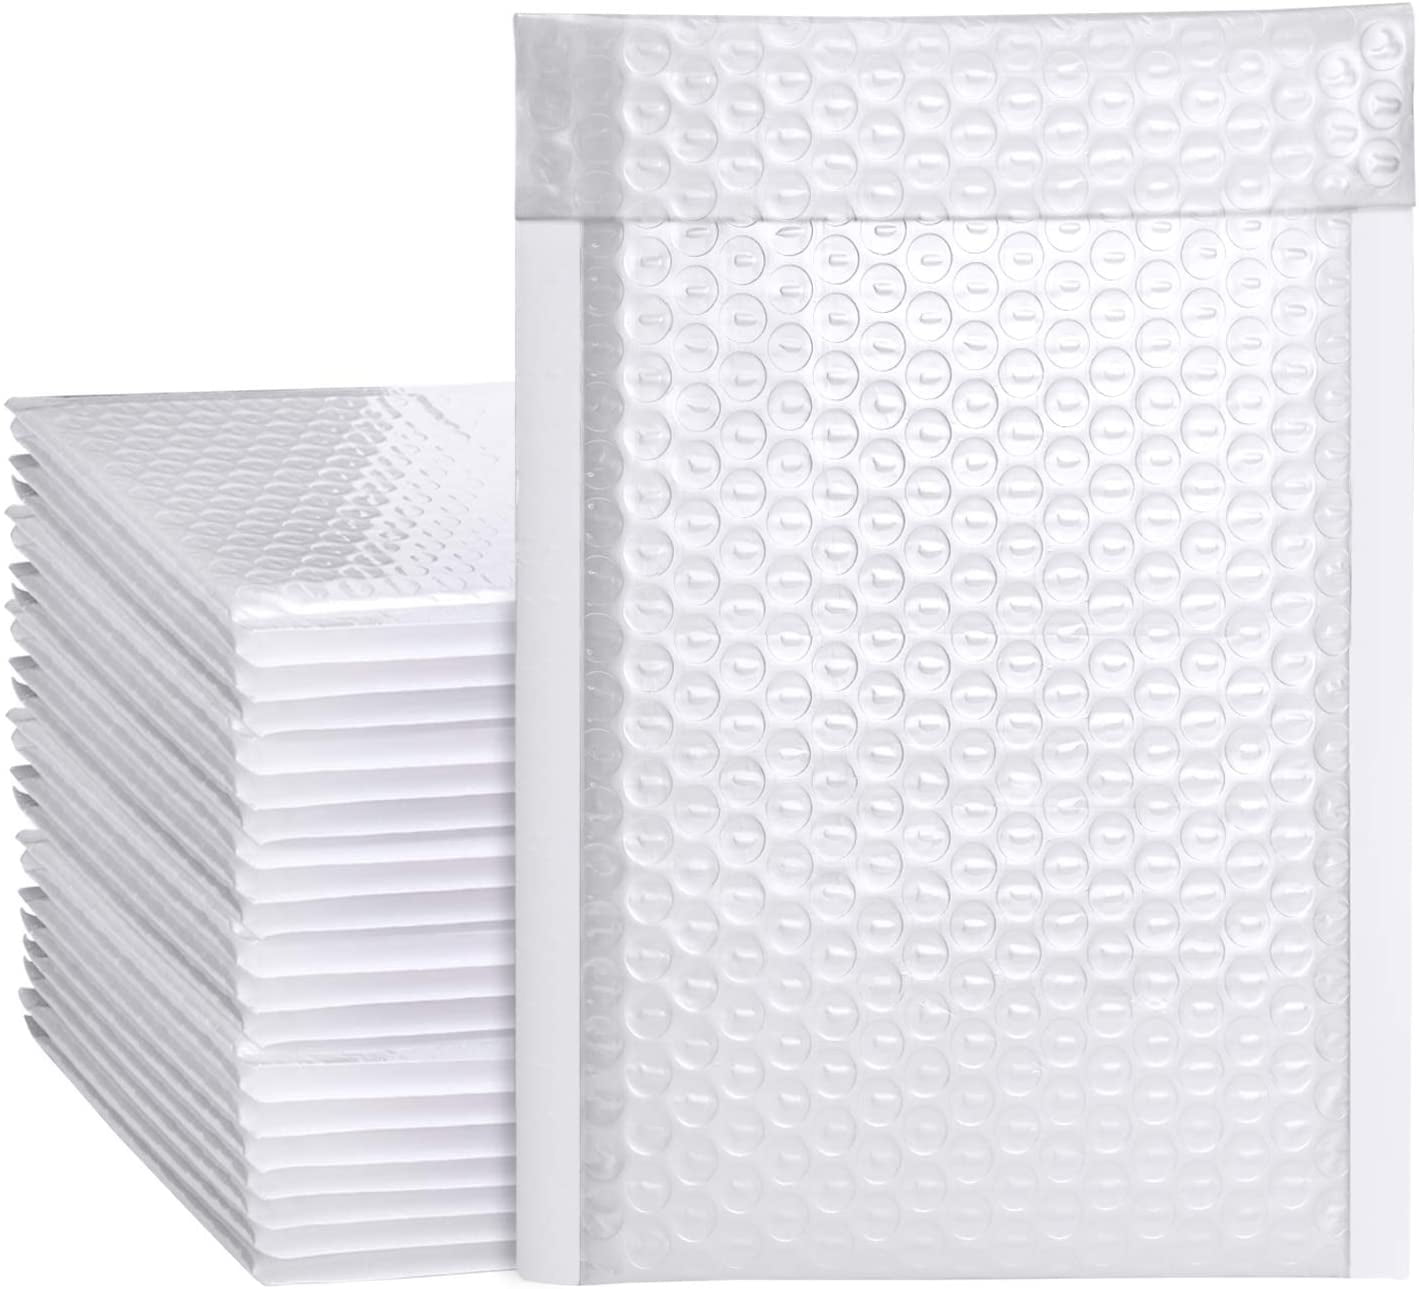 Pack of 50 Secure Seal #7 14.25x20 Poly Bubble Mailers Padded Shipping Envelope Mailers